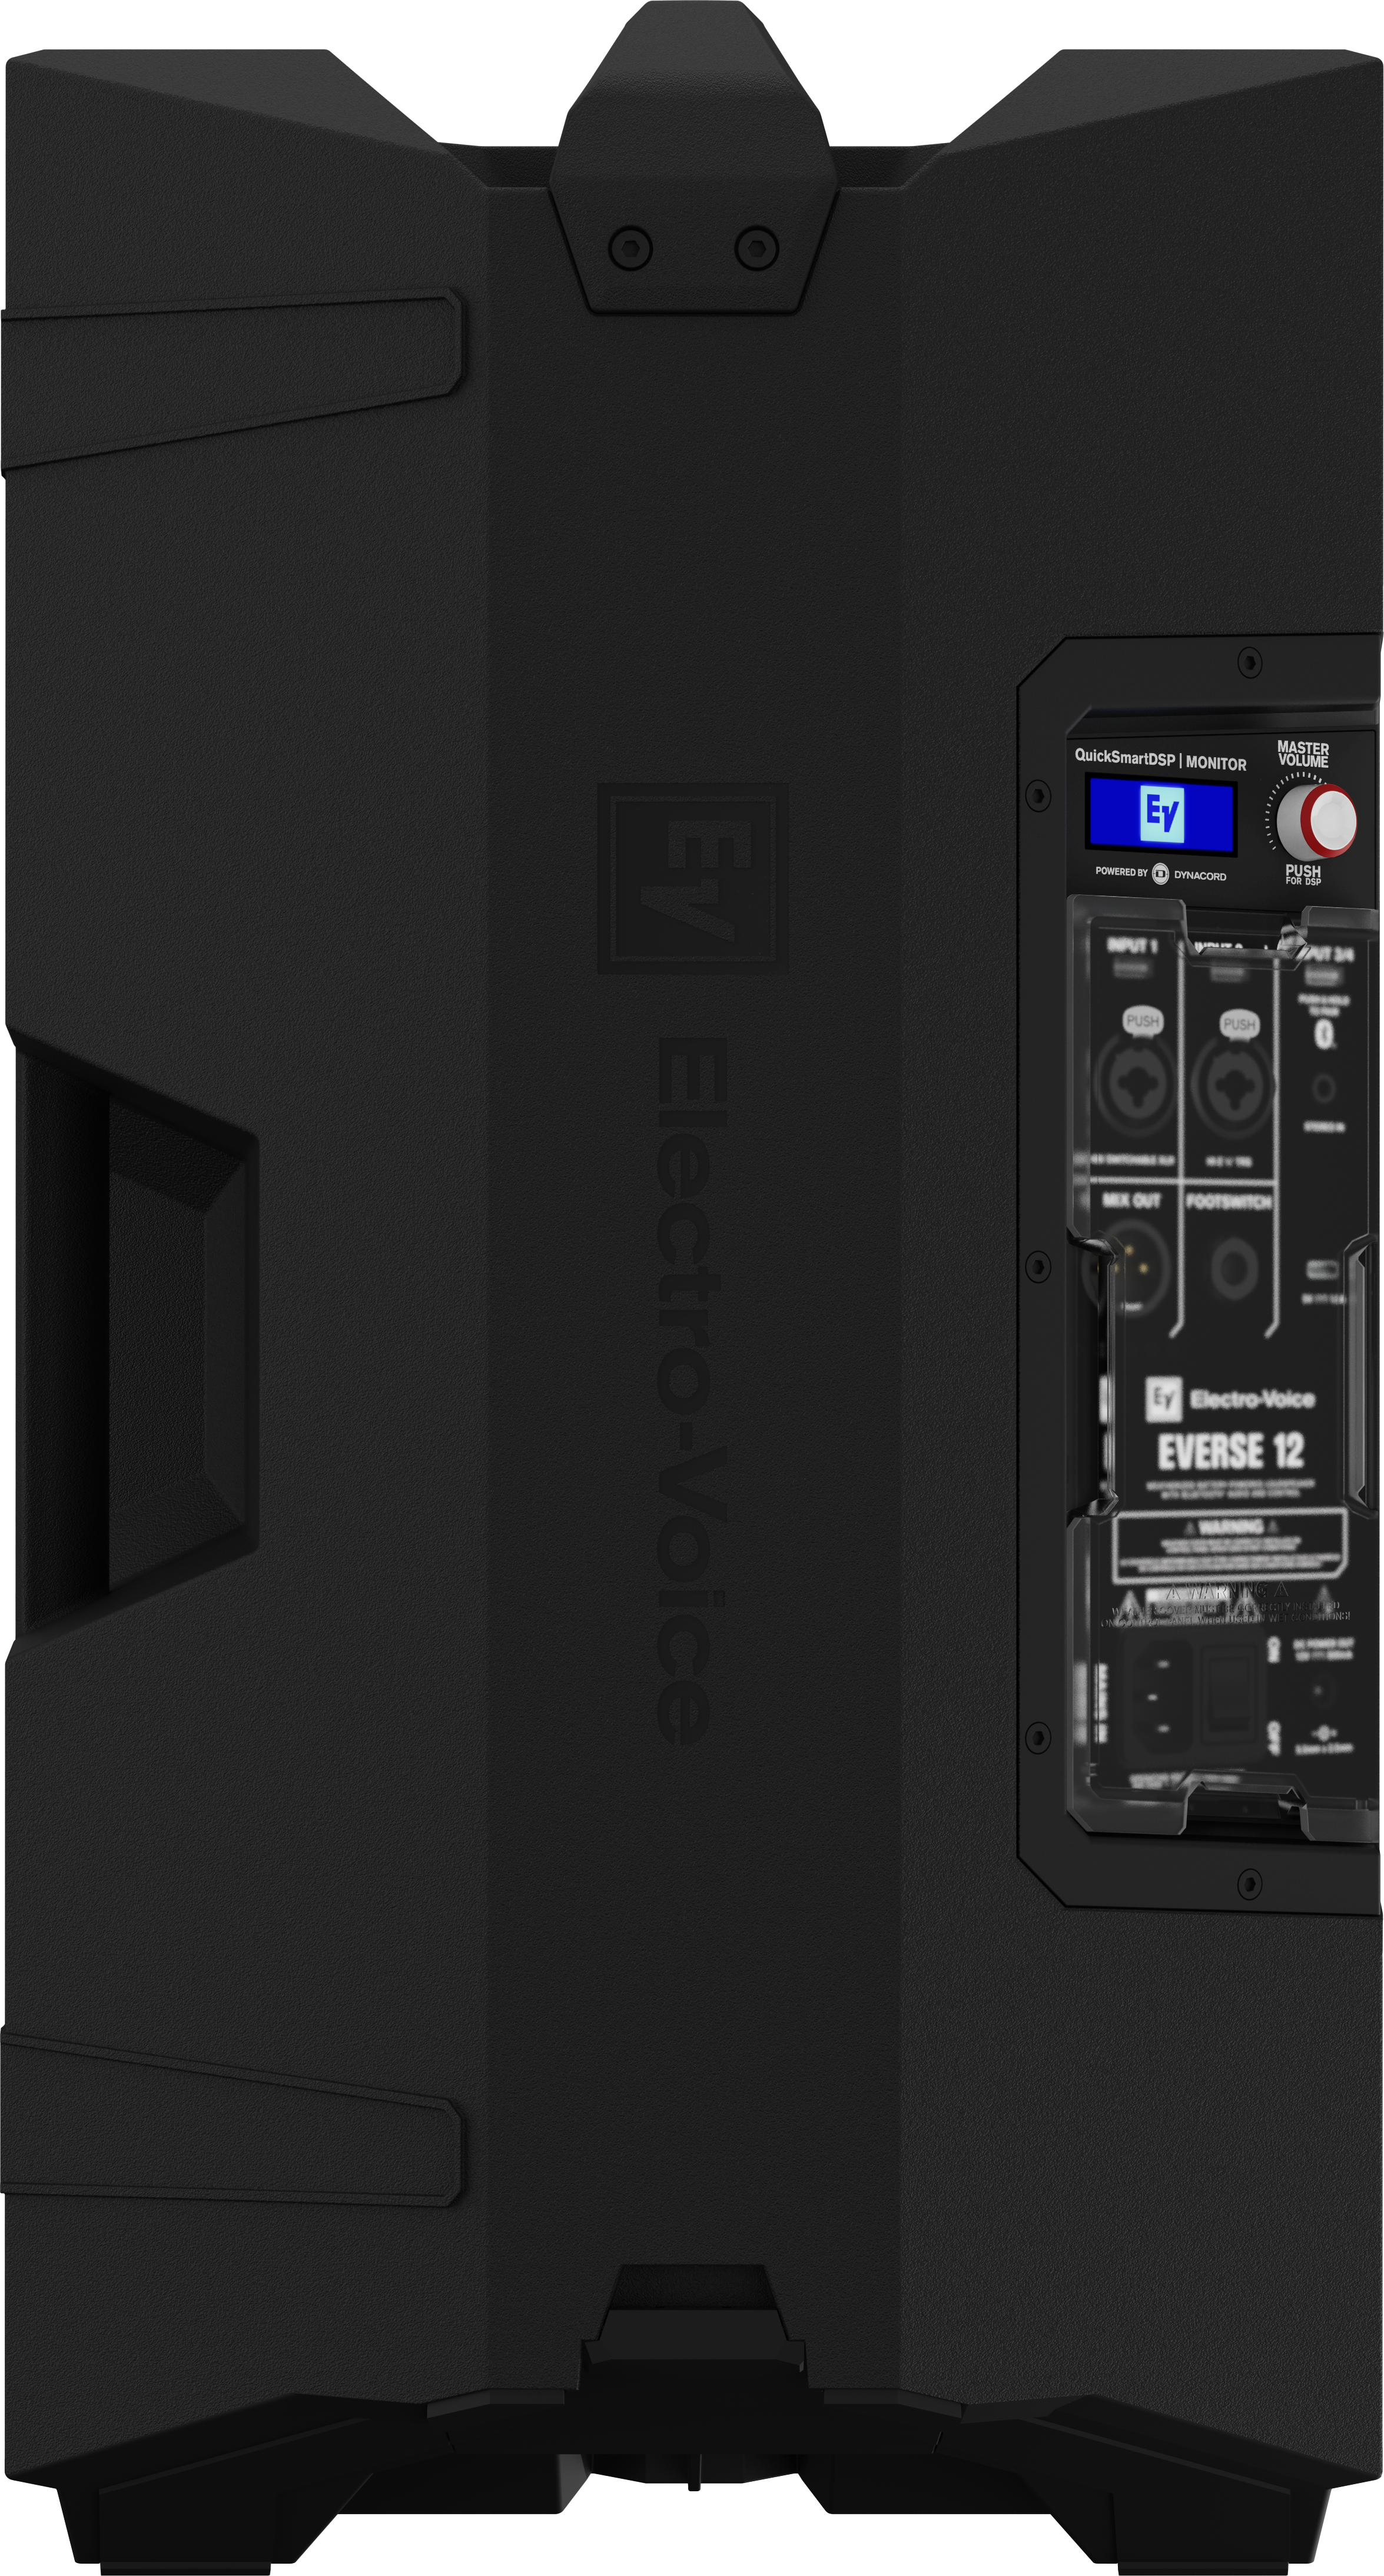 Electro-Voice EVERSE 12 Weatherised Battery-Powered Speaker w/Bluetooth Audio & Control